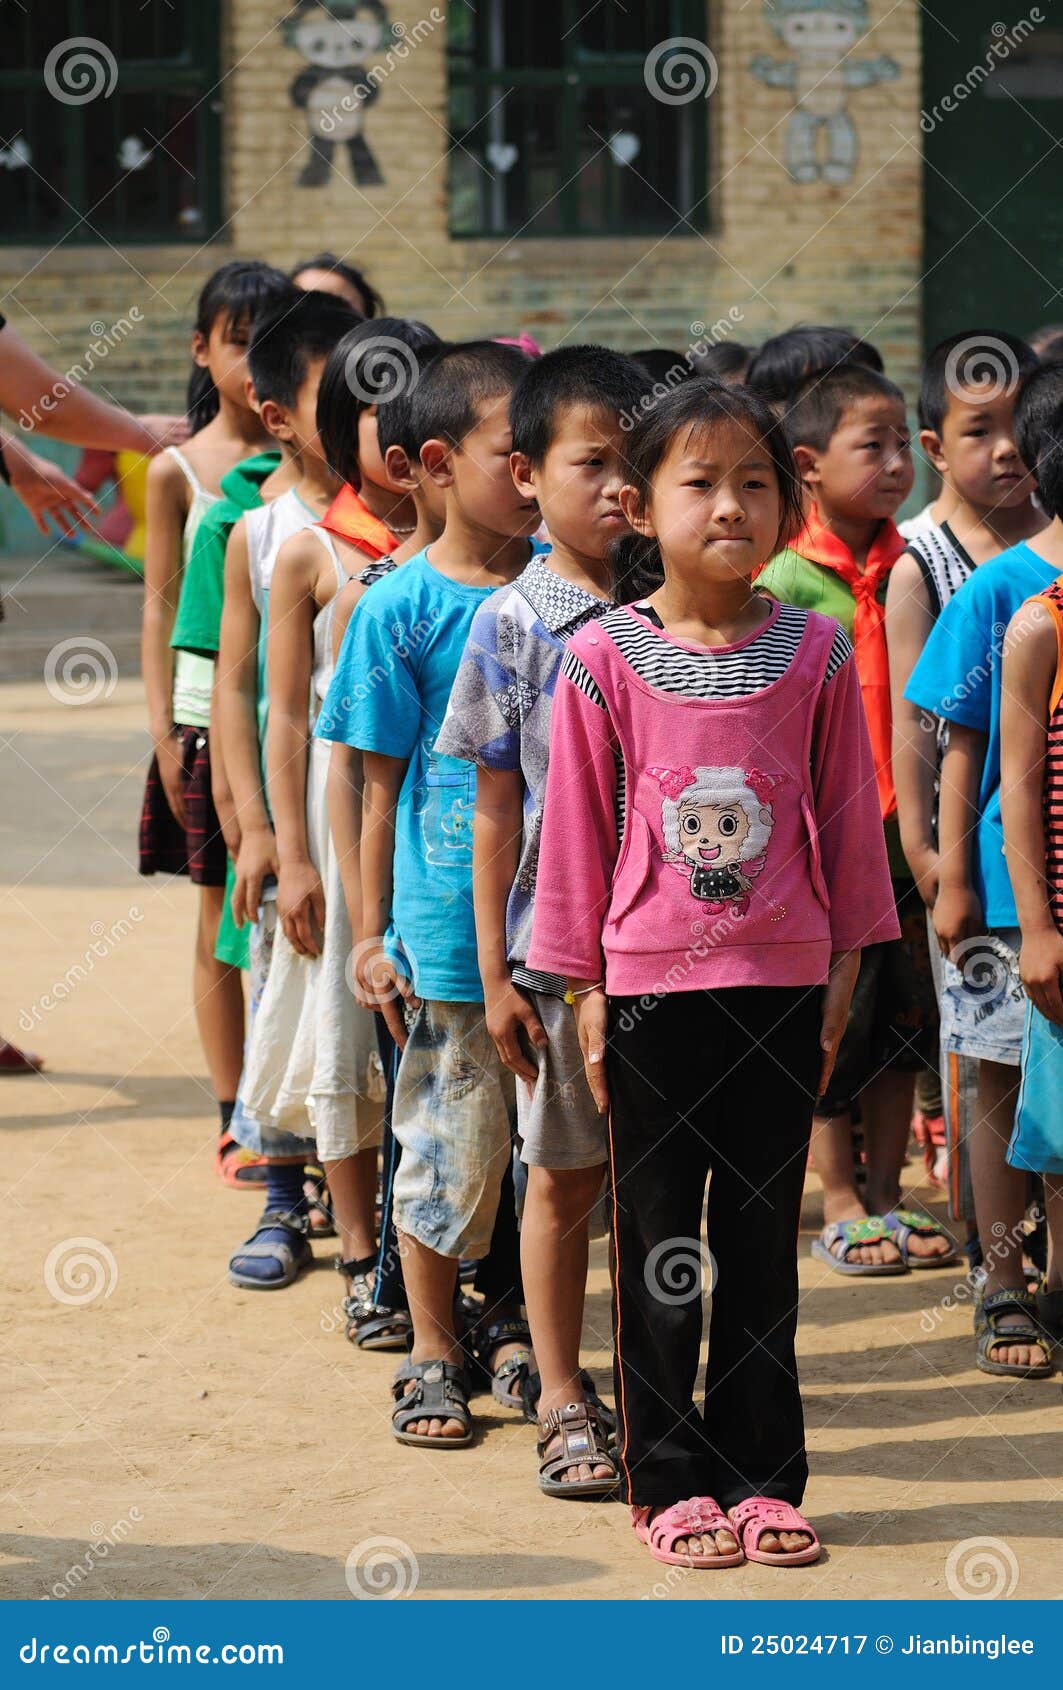 Lined Up The Children Editorial Photography Image Of School